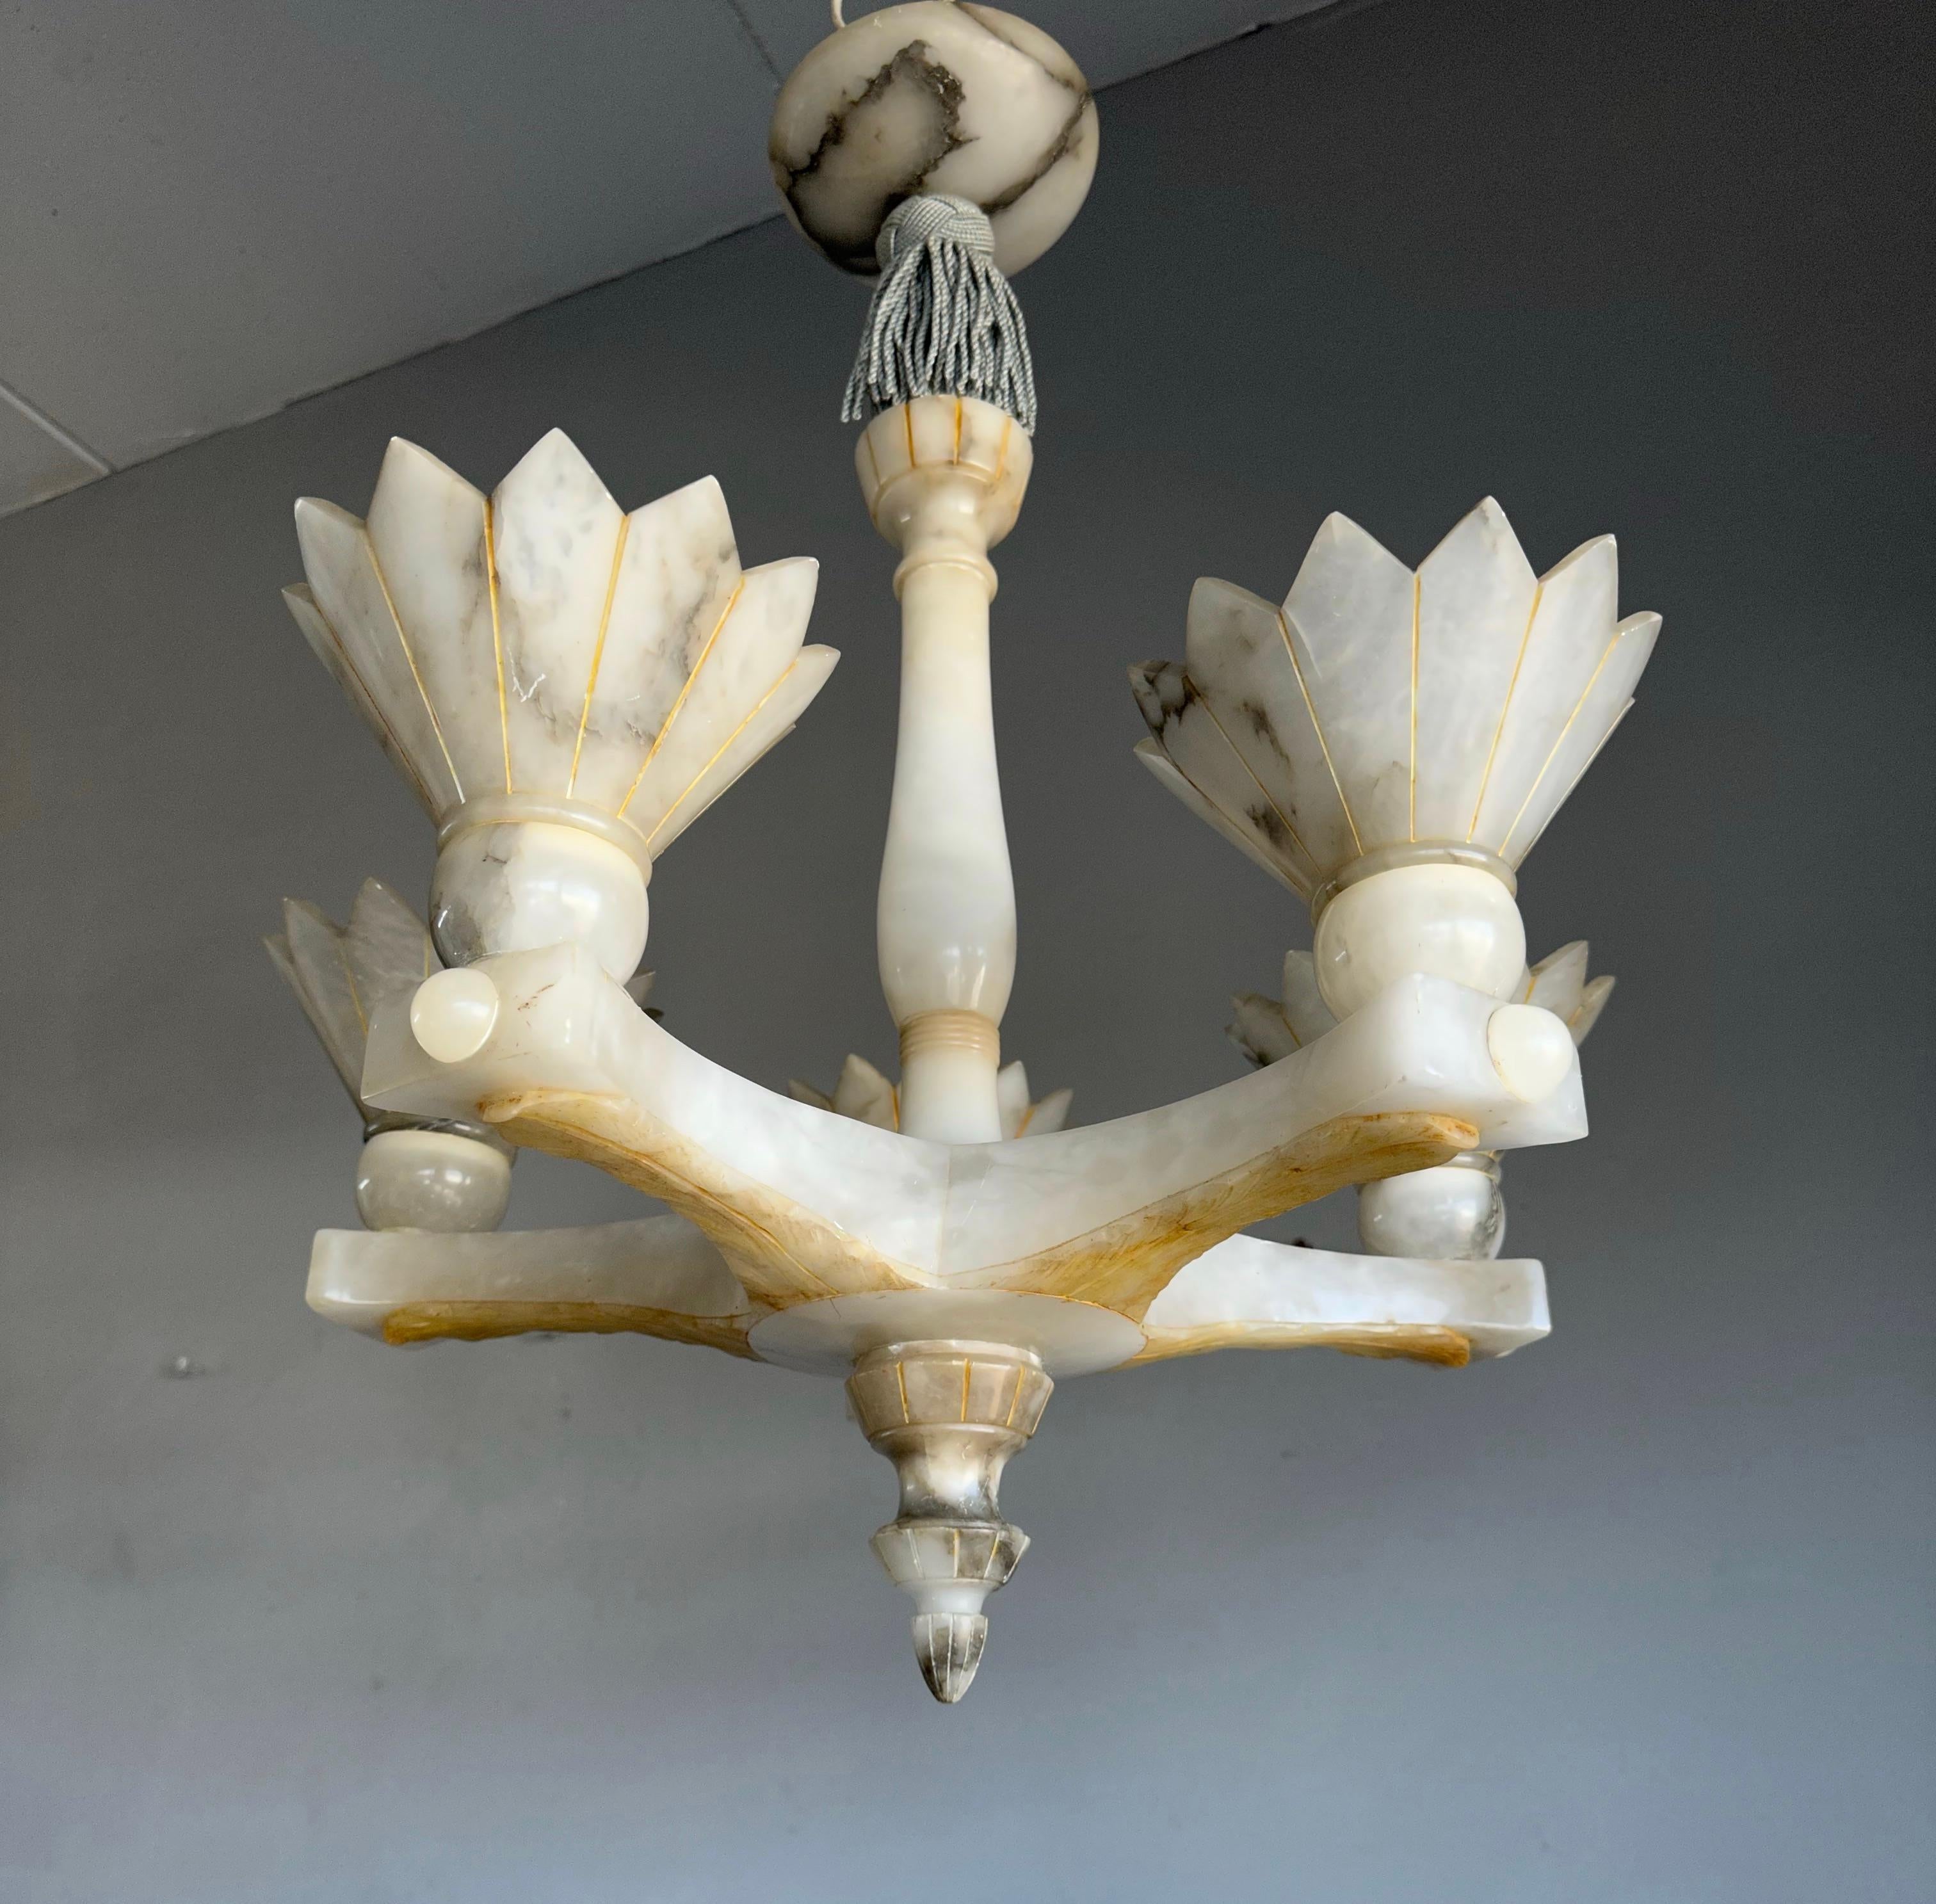 Early 20th century, majestic, pure Art Deco, work-of-art light fixture.

With early 20th century lighting in general (and alabaster fixtures in particular) as one of our specialities, we were again amazed to find a completely unique and highly